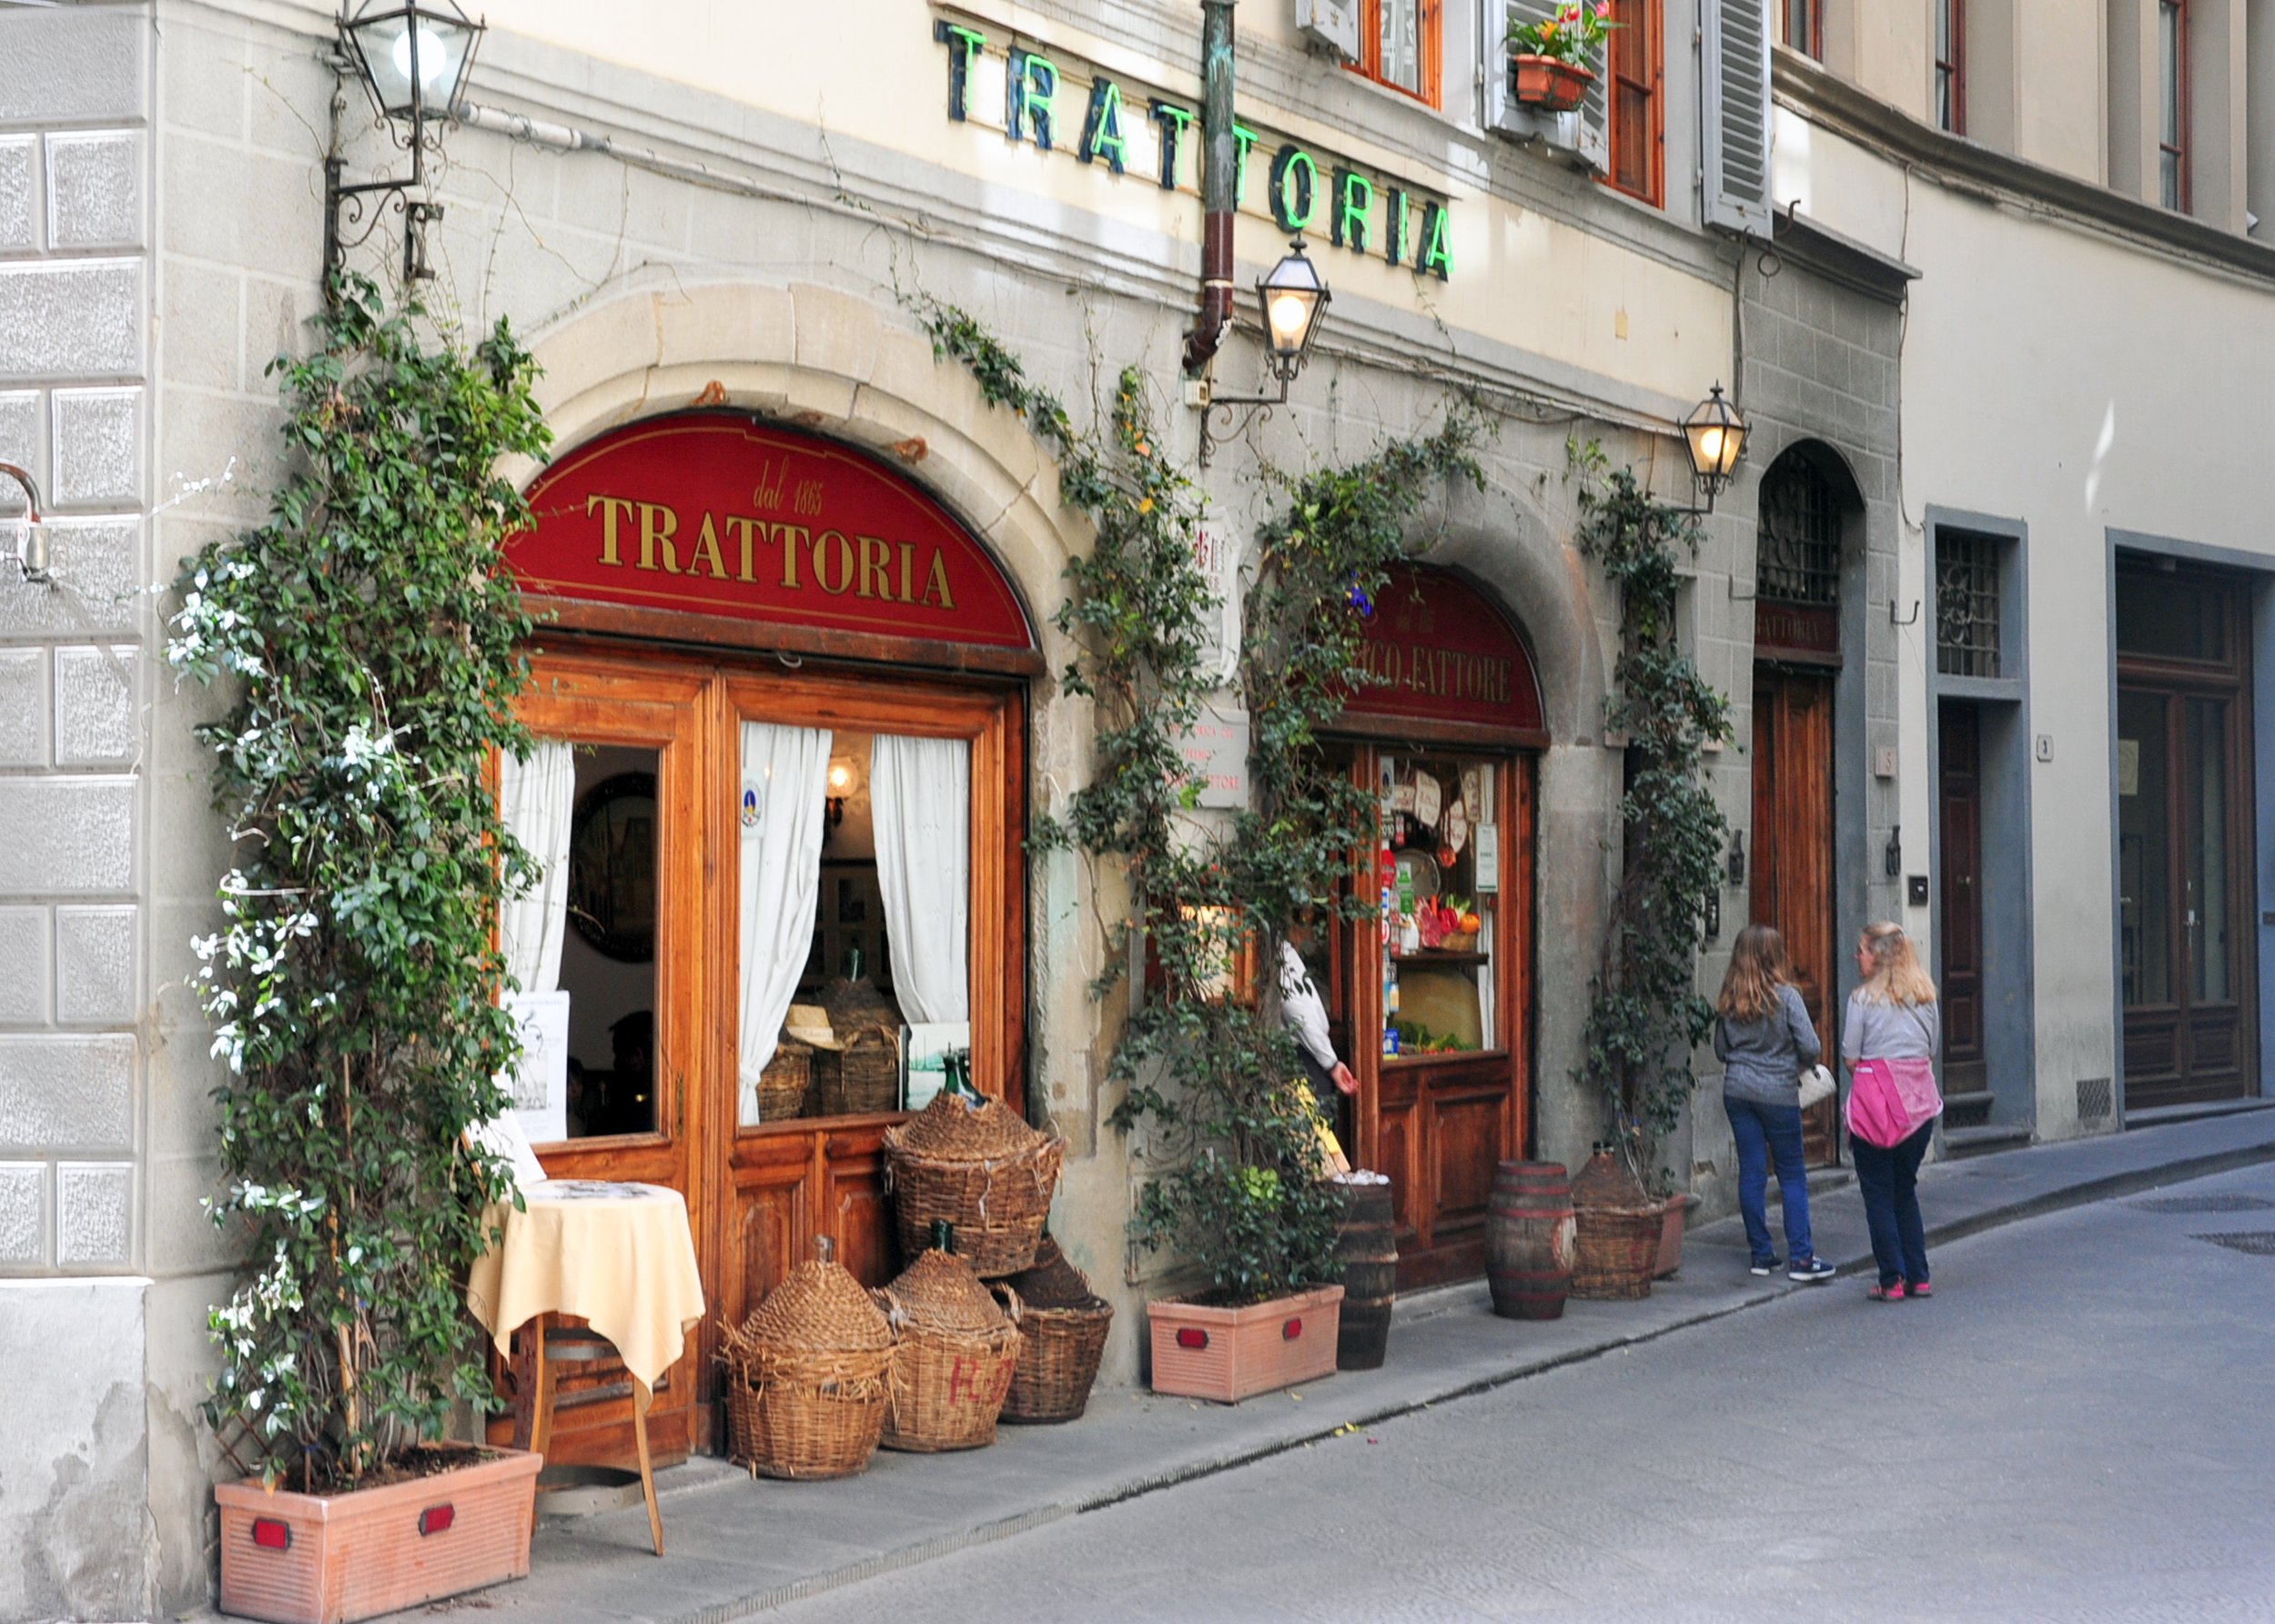 This trattoria served as the inspiration for Enzo's Trattoria in my novel